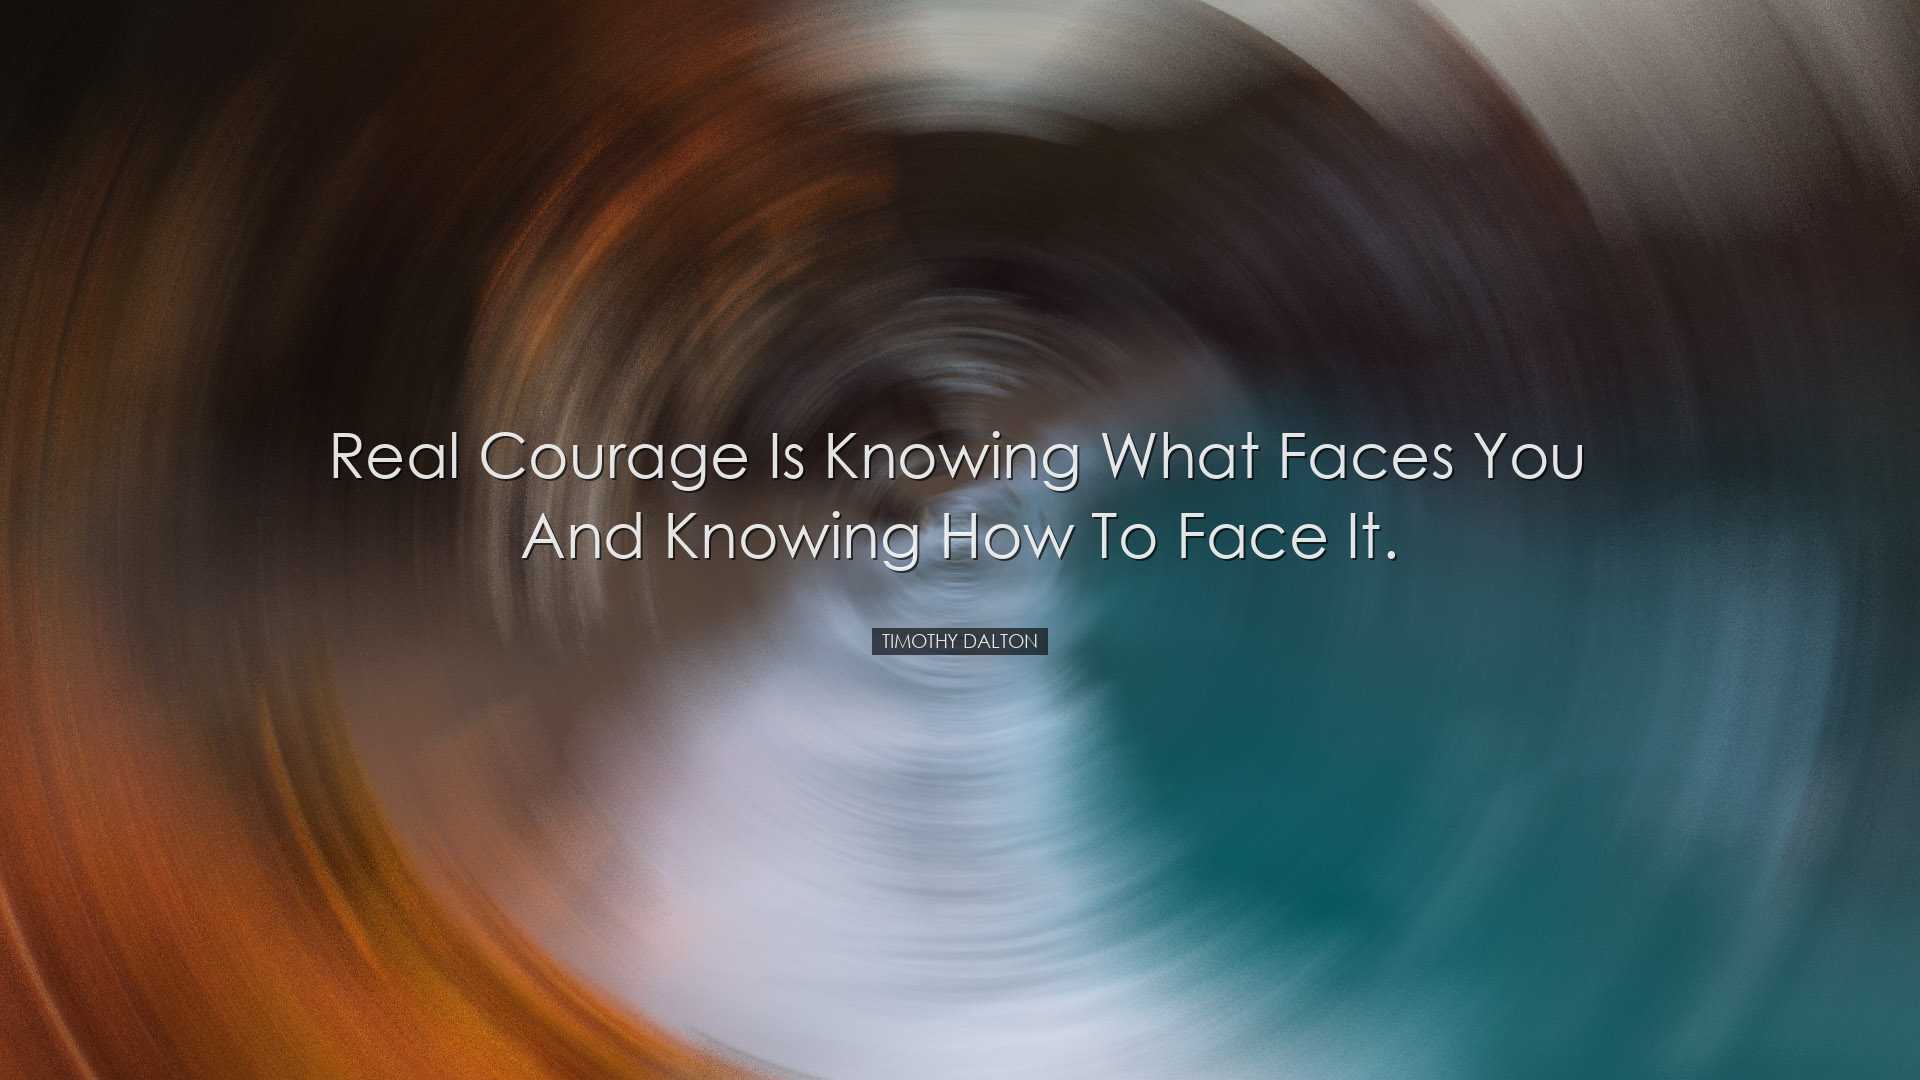 Real courage is knowing what faces you and knowing how to face it.